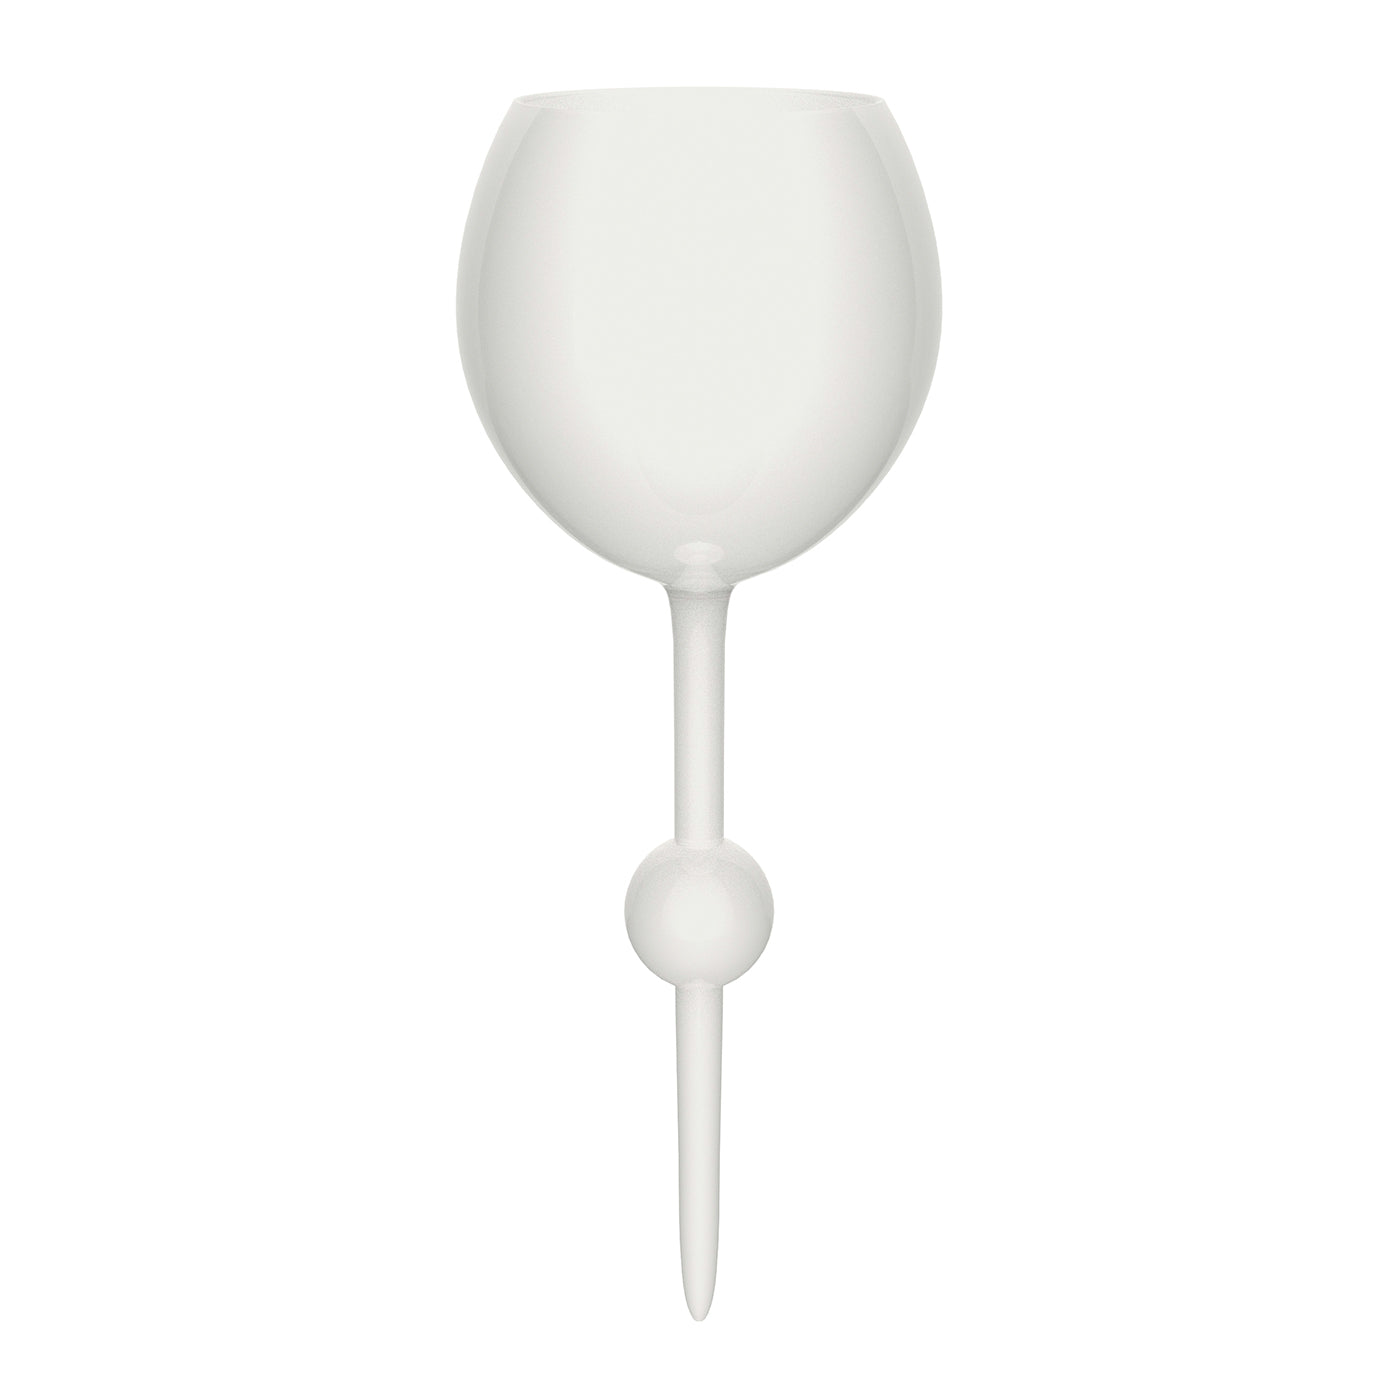 The Beach Glass White Sands Floating Wine Glass - the beach glass